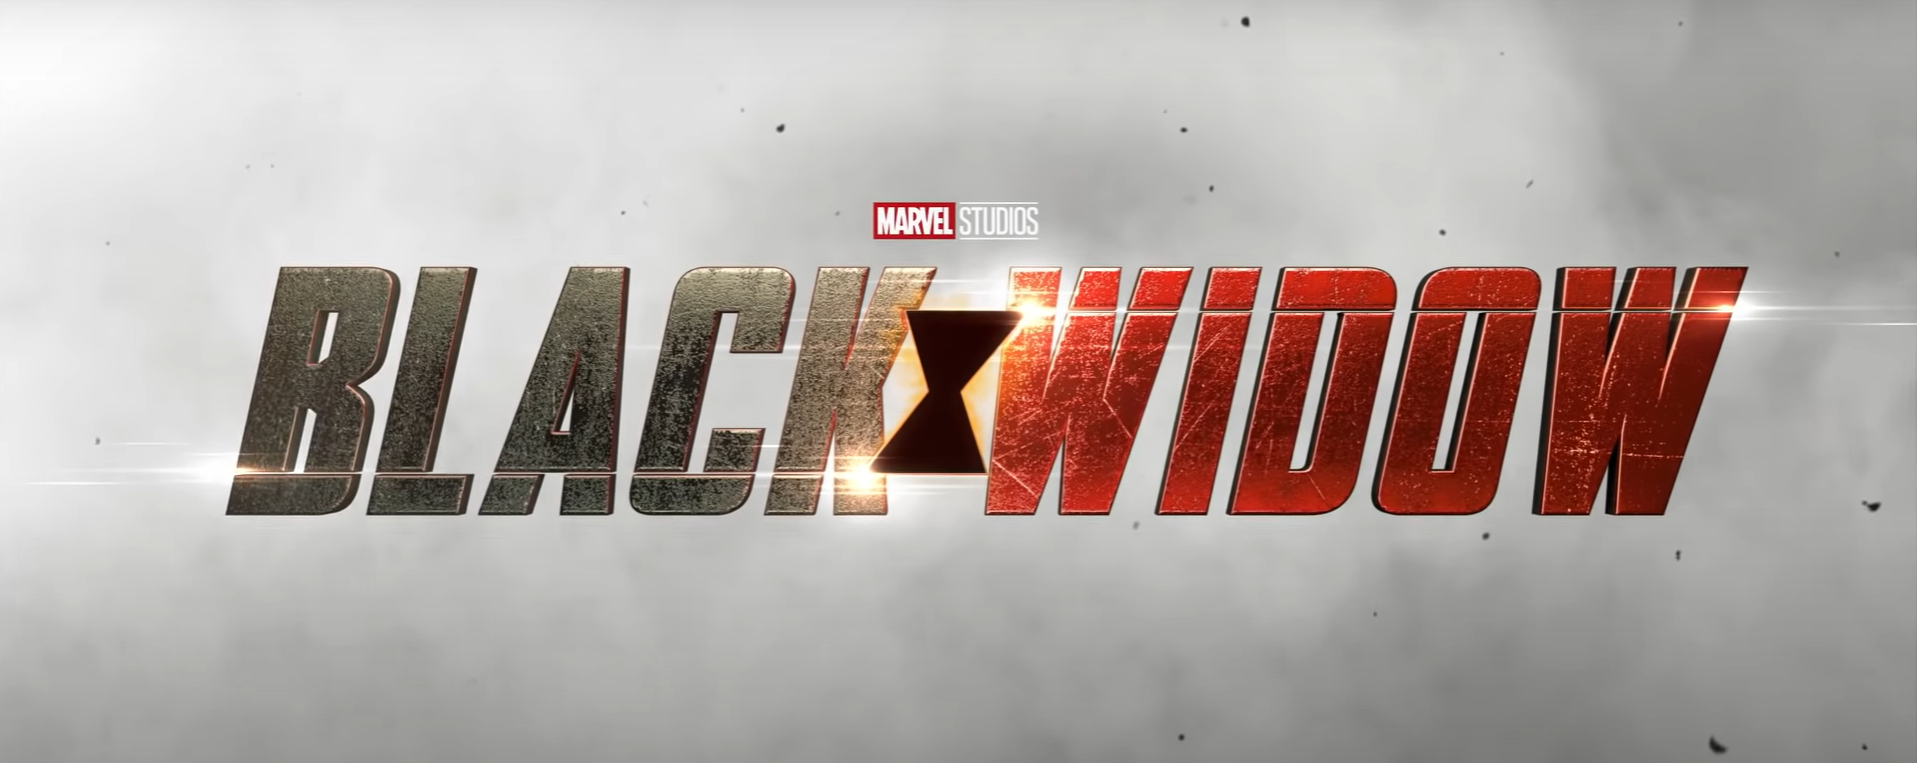 Marvel Primes Fans for its Black Widow Launch with a Final Trailer Boasting Brand New Footage - The Illuminerdi